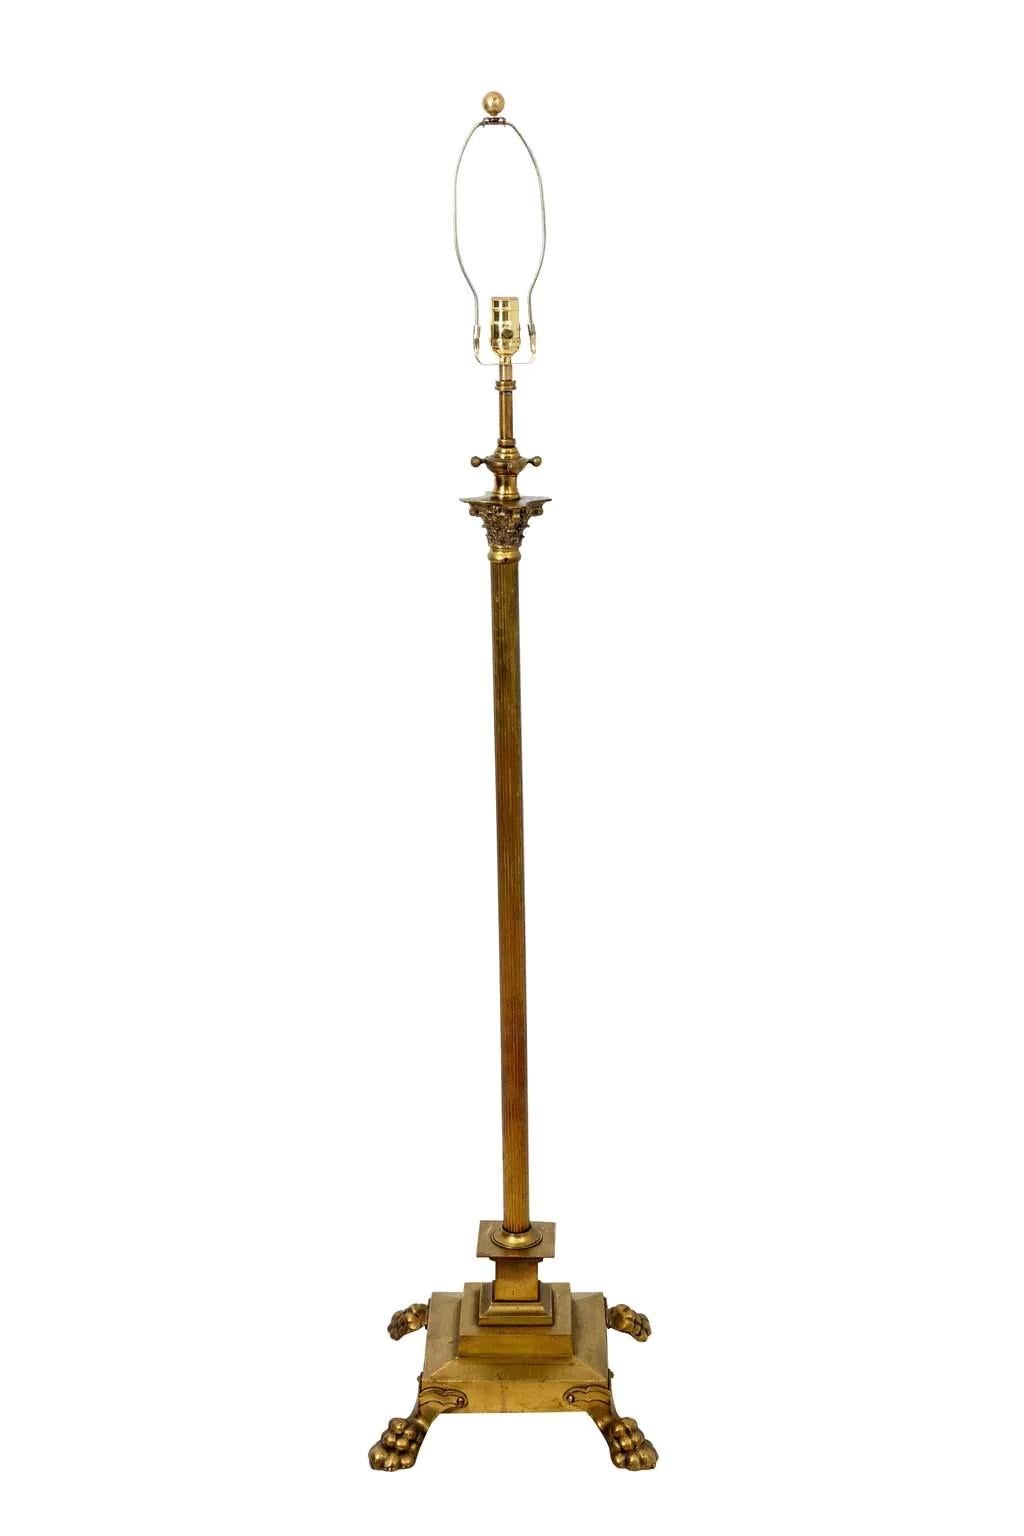 Brass Paw Foot Floor Lamp With Adjustable Height For Sale 6